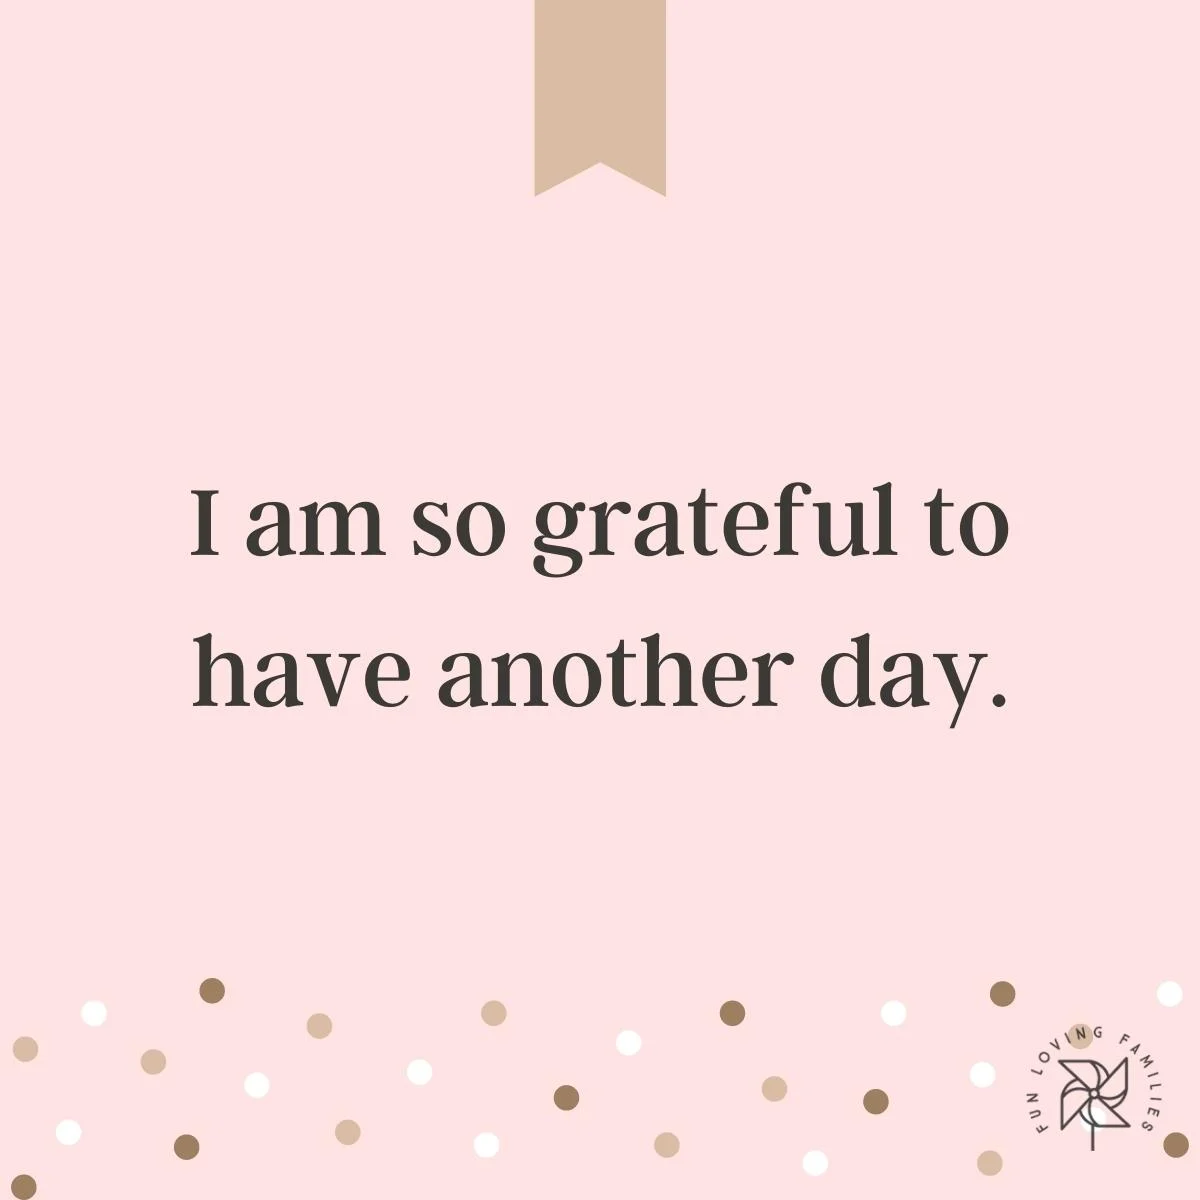 I am so grateful to have another day affirmation